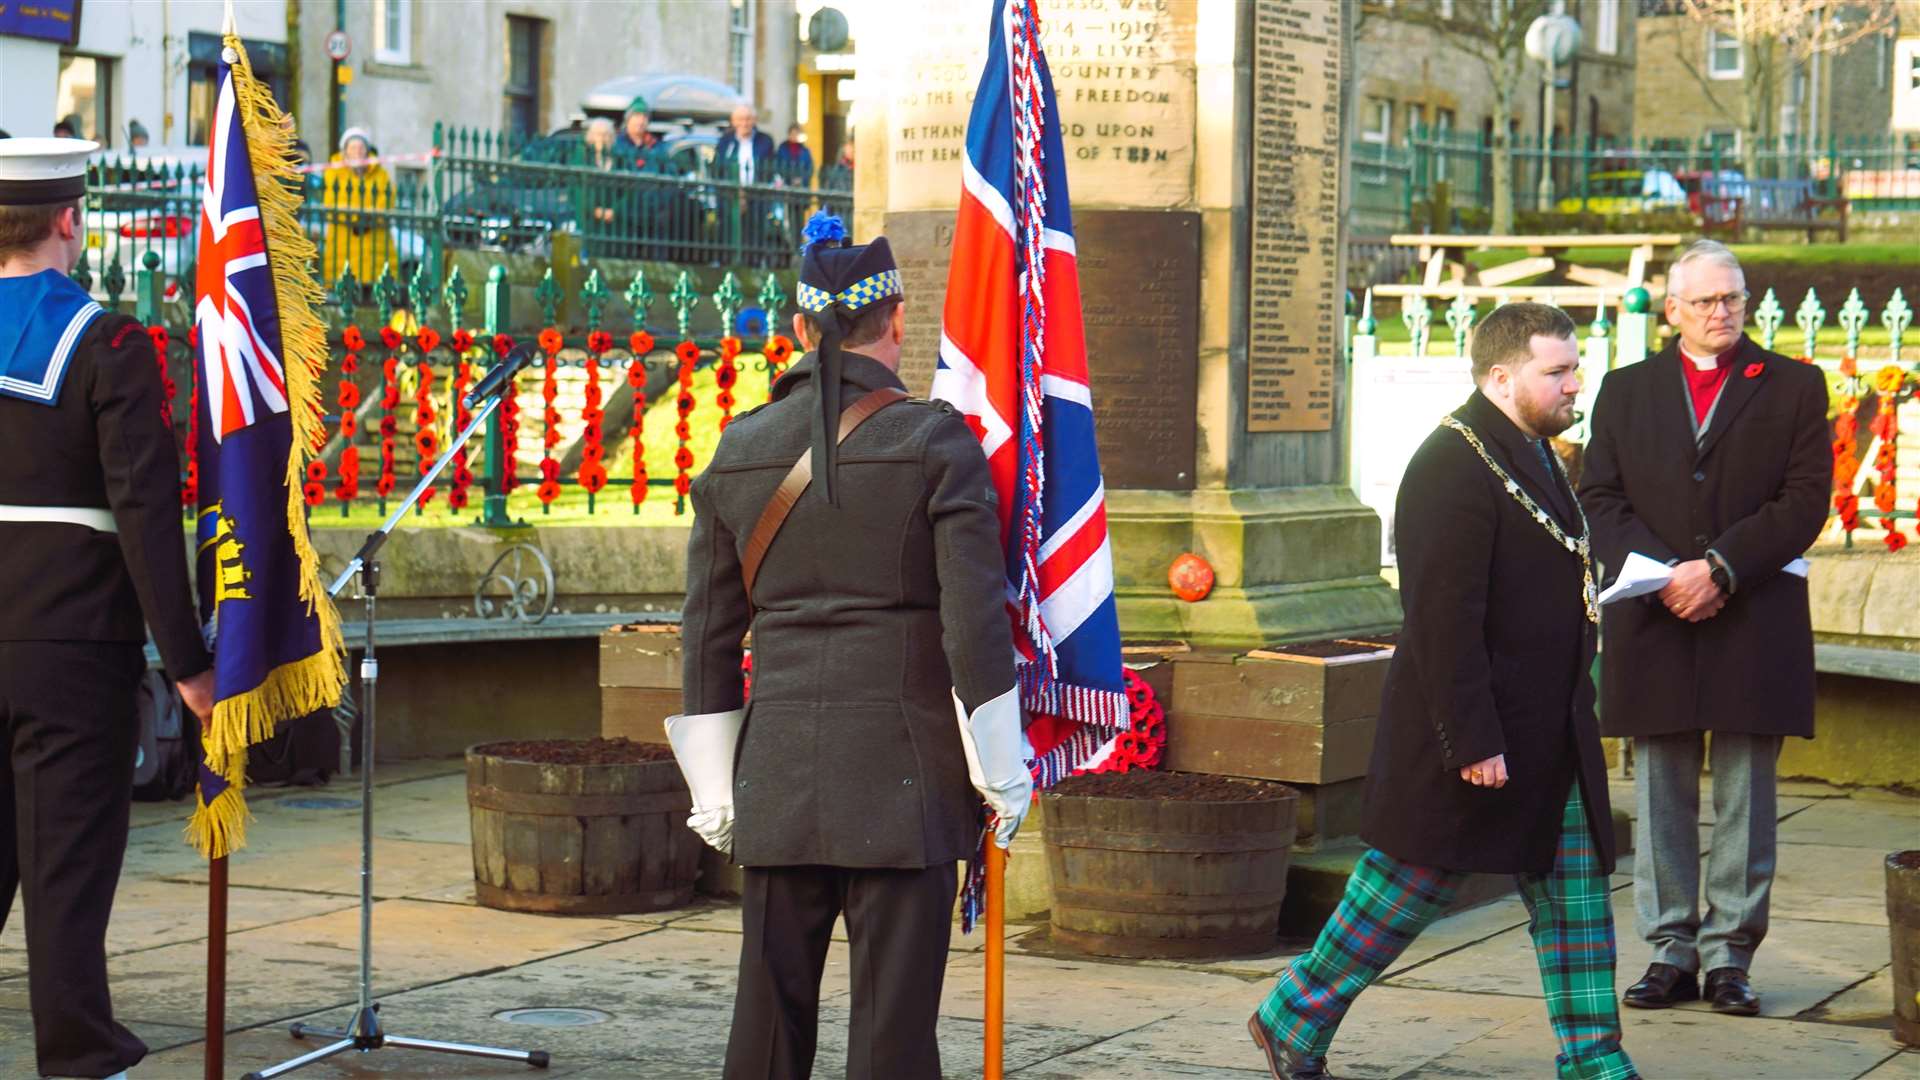 Thurso provost Struan Mackie walks back after laying a wreath on behalf of the council. Picture: DGS